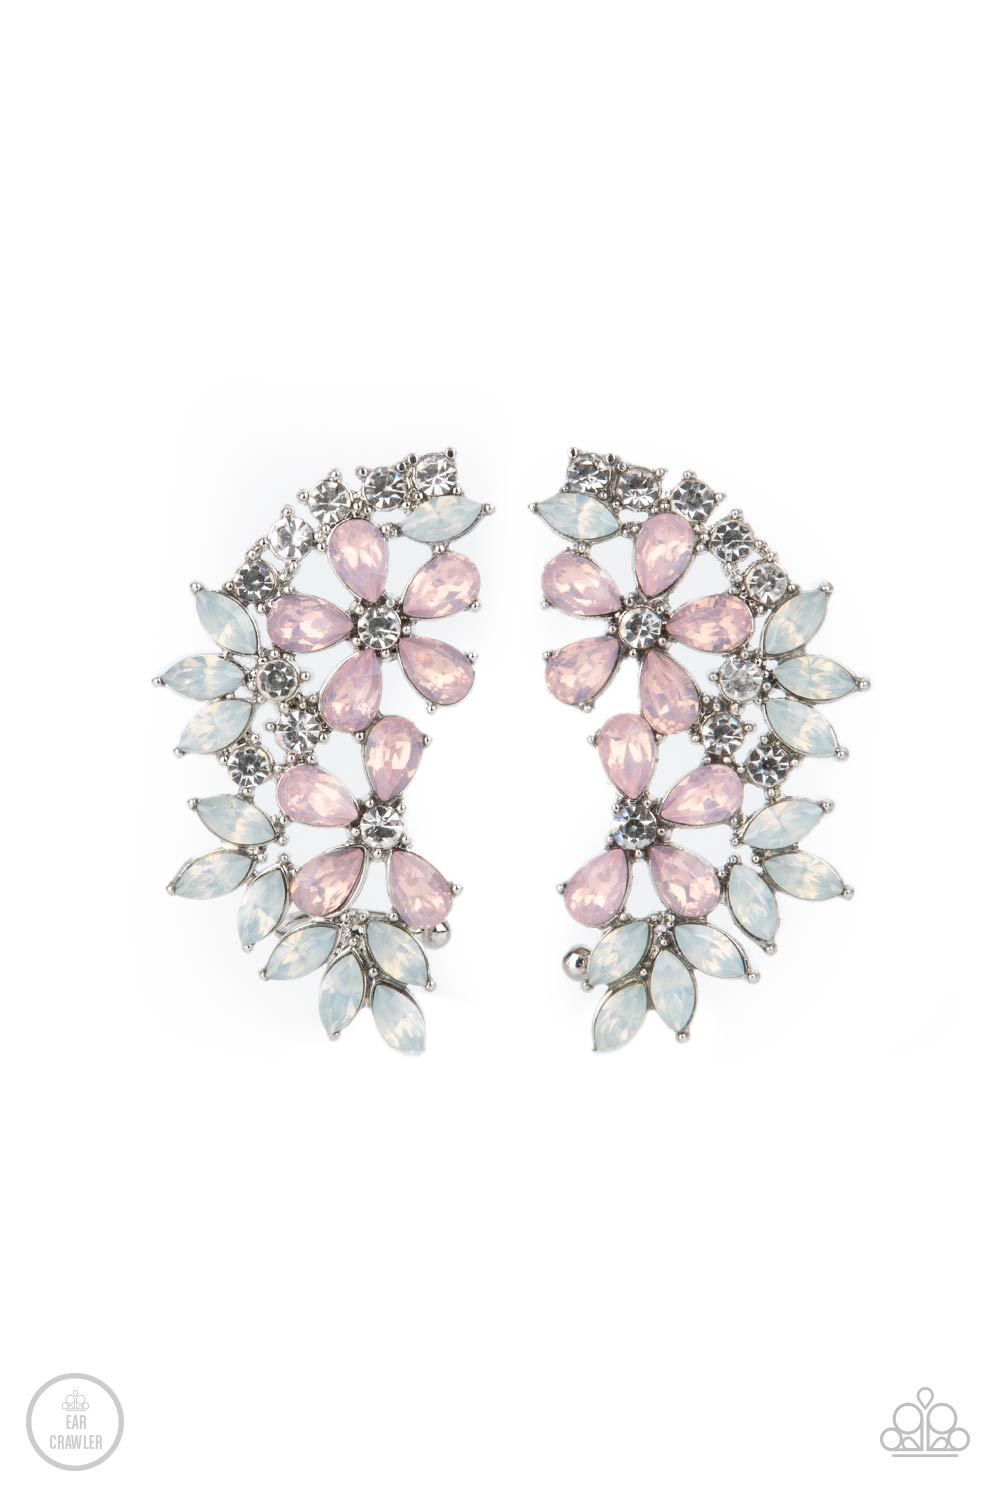 Garden Party Powerhouse Pink Ear Crawler Earring - Paparazzi Accessories  Featuring a milky opalescence, white marquise and pink teardrop rhinestones coalesce into a sparkly floral centerpiece that flawlessly climbs the ear. Earring attaches to a standard post fitting. Features a dainty cuff attached to the top for a secure fit.  All Paparazzi Accessories are lead free and nickel free!  Sold as one pair of ear crawlers.